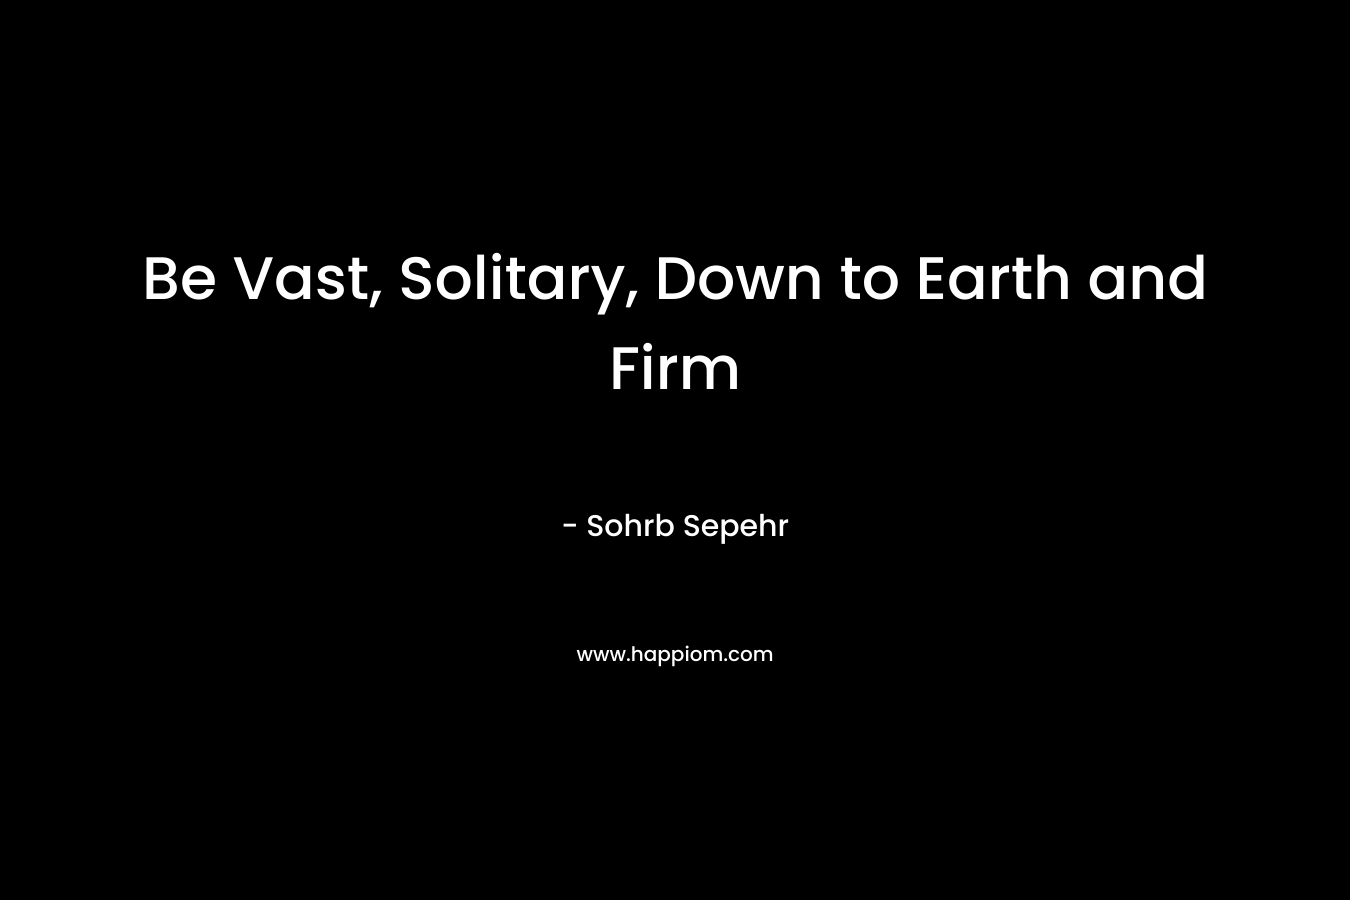 Be Vast, Solitary, Down to Earth and Firm